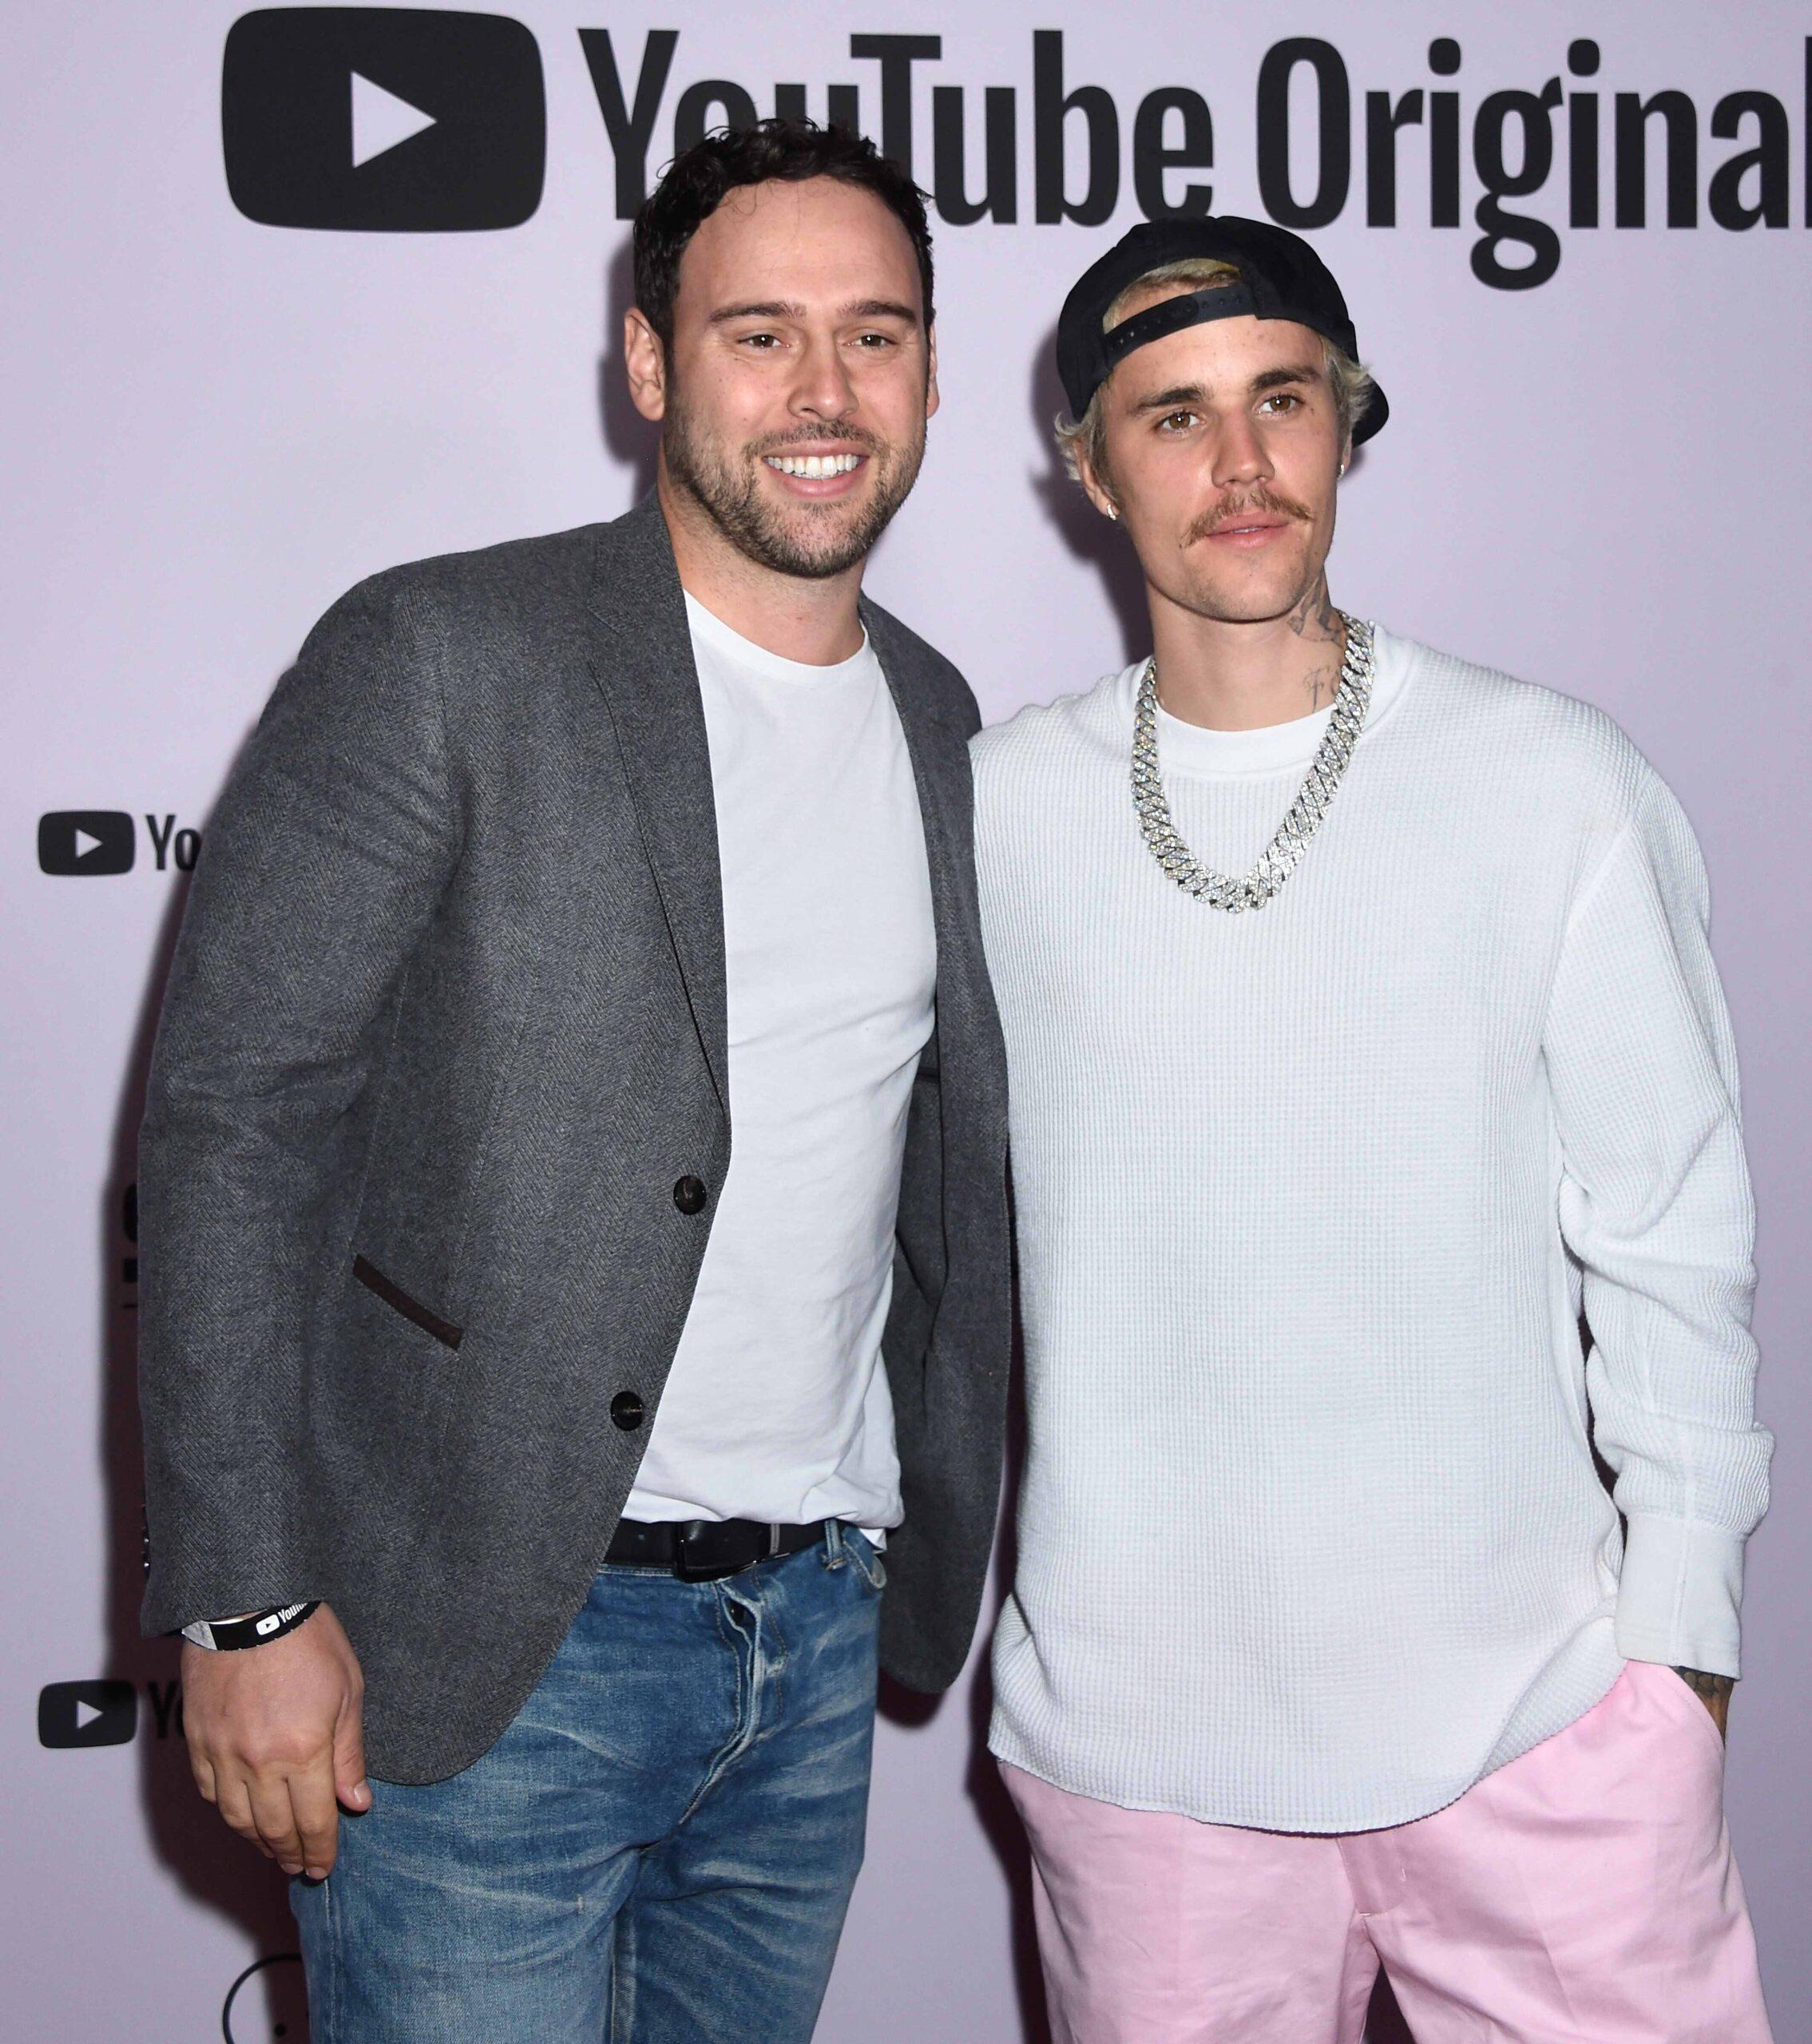 Scooter Braun Is NOT The Target Of FBI Investigation Into 'White Collar' Crimes